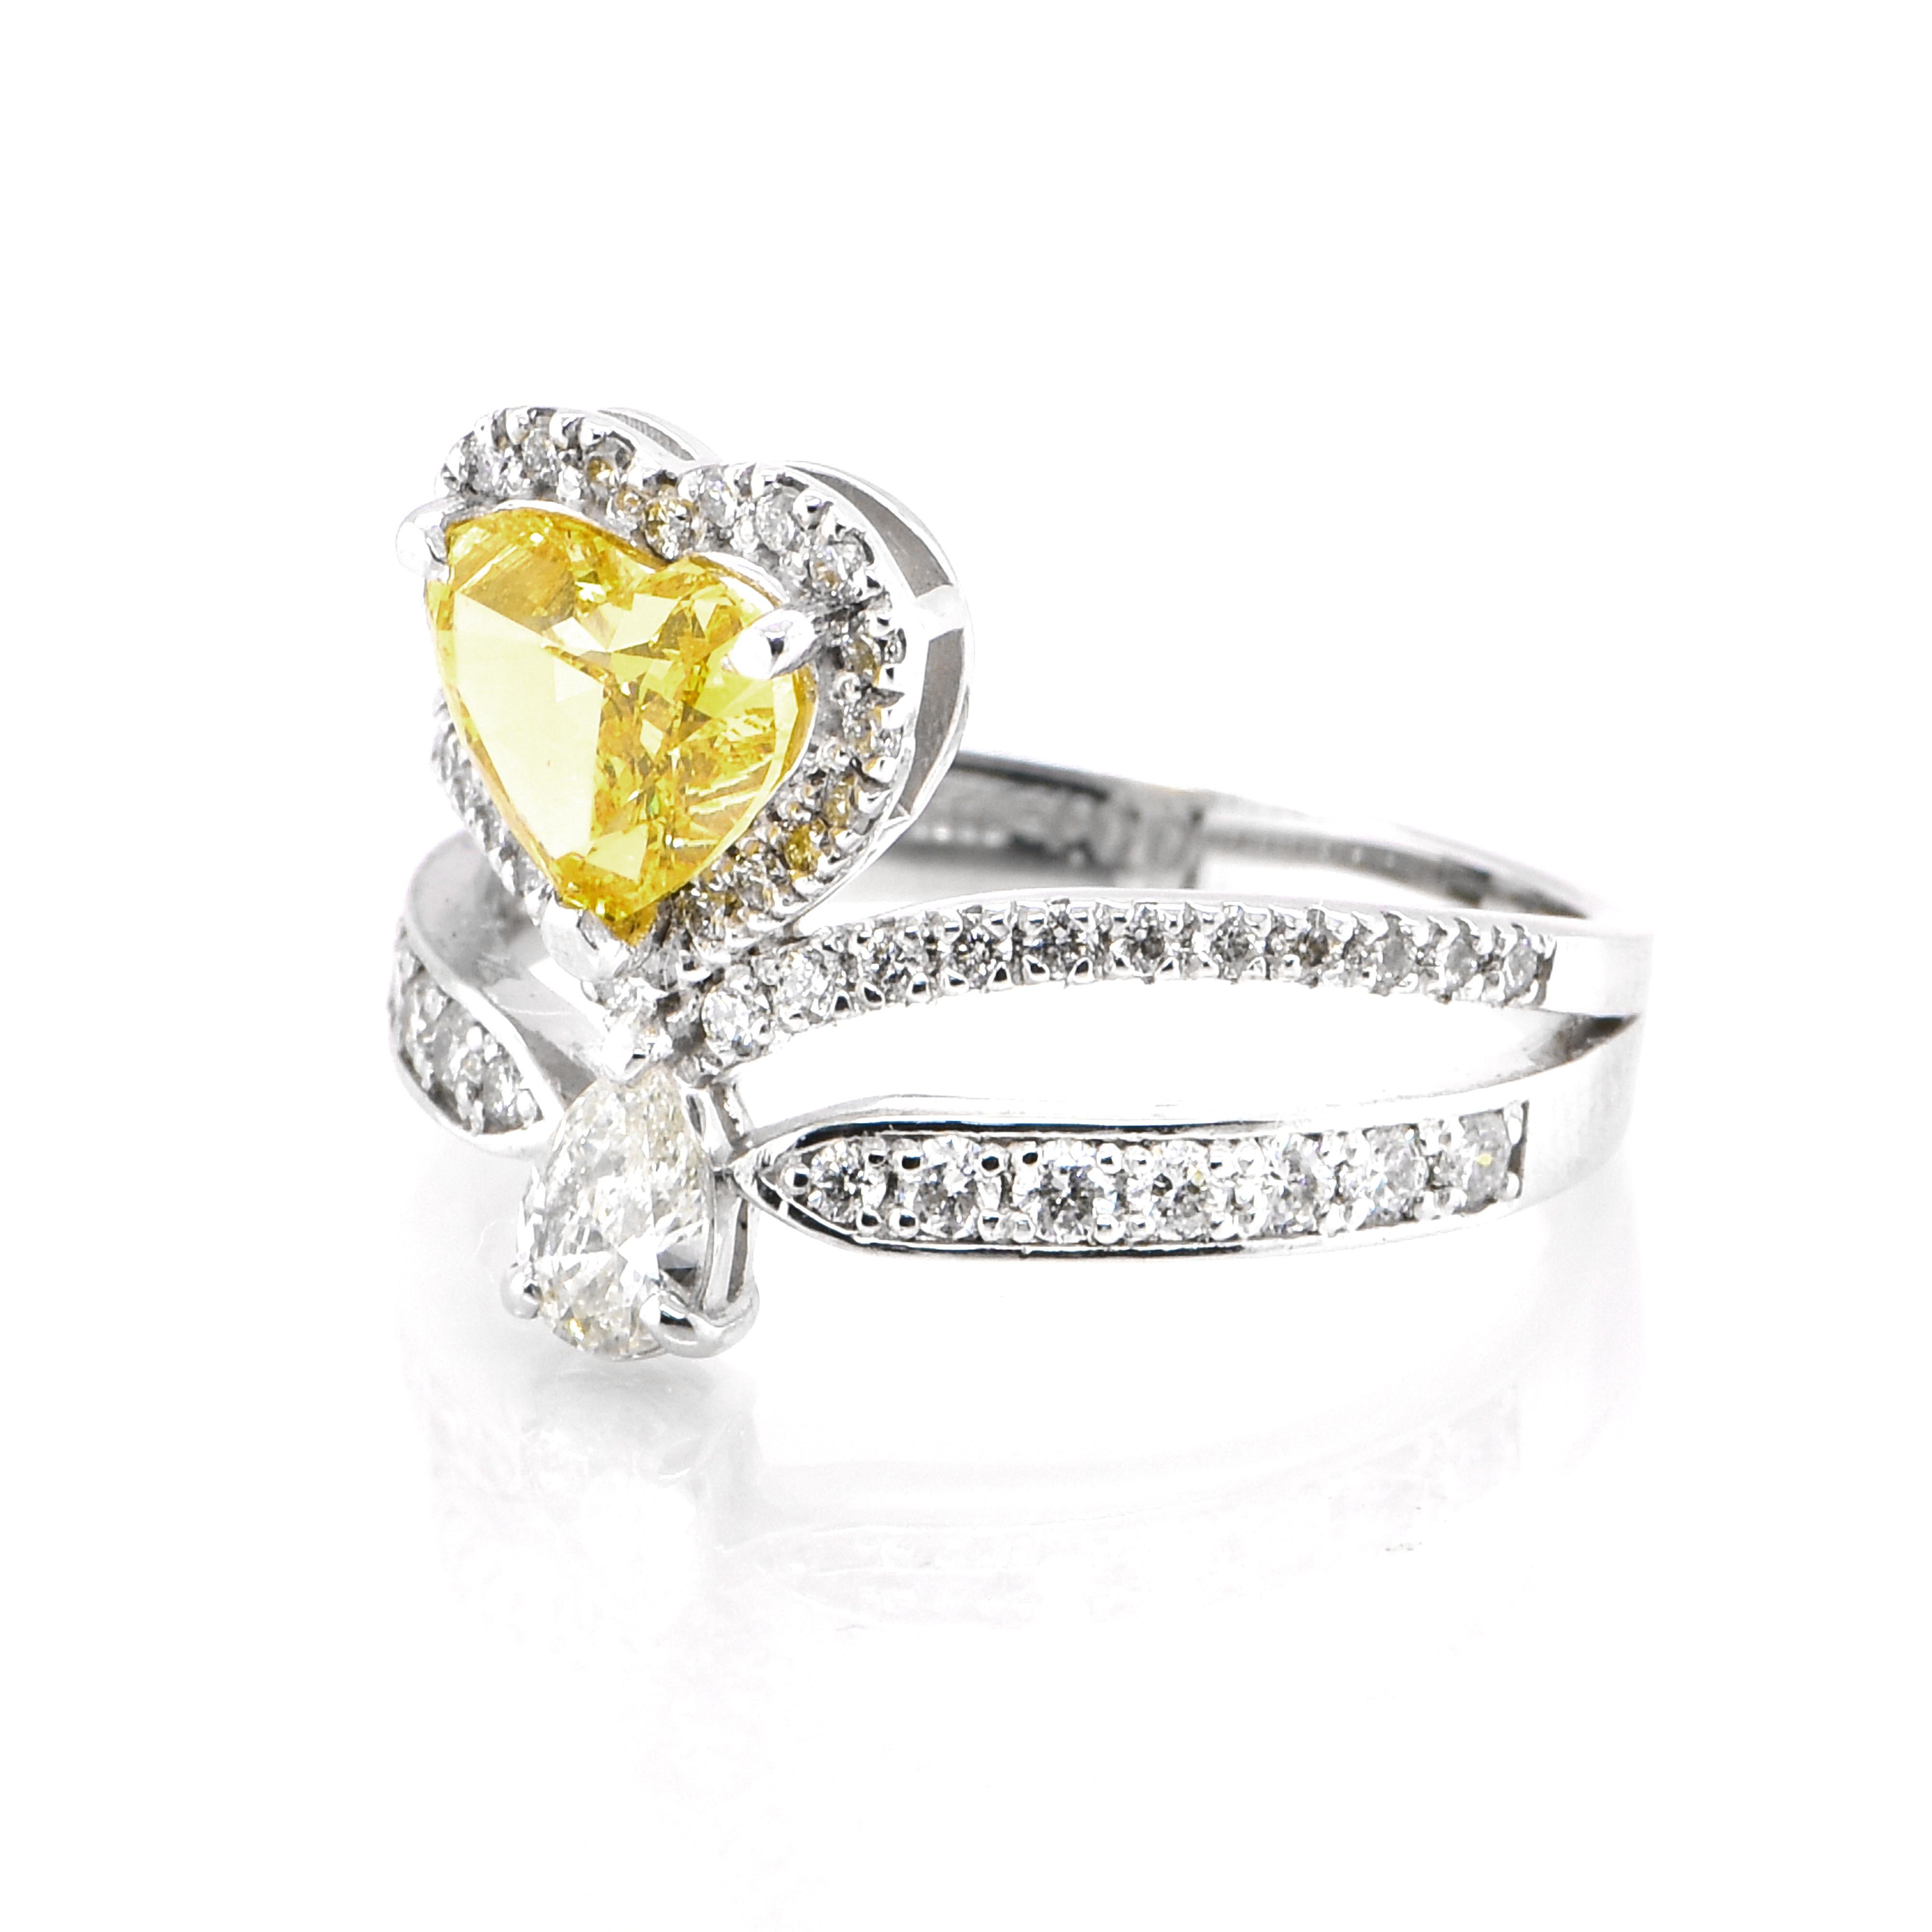 A beautiful ring featuring a GIA Certified 1.00 Carat Natural Fancy Vivid Orange Yellow Diamond and 0.64 Carat Diamond accents set in Platinum. Diamonds have been adorned and cherished throughout human history and date back to thousands of years.